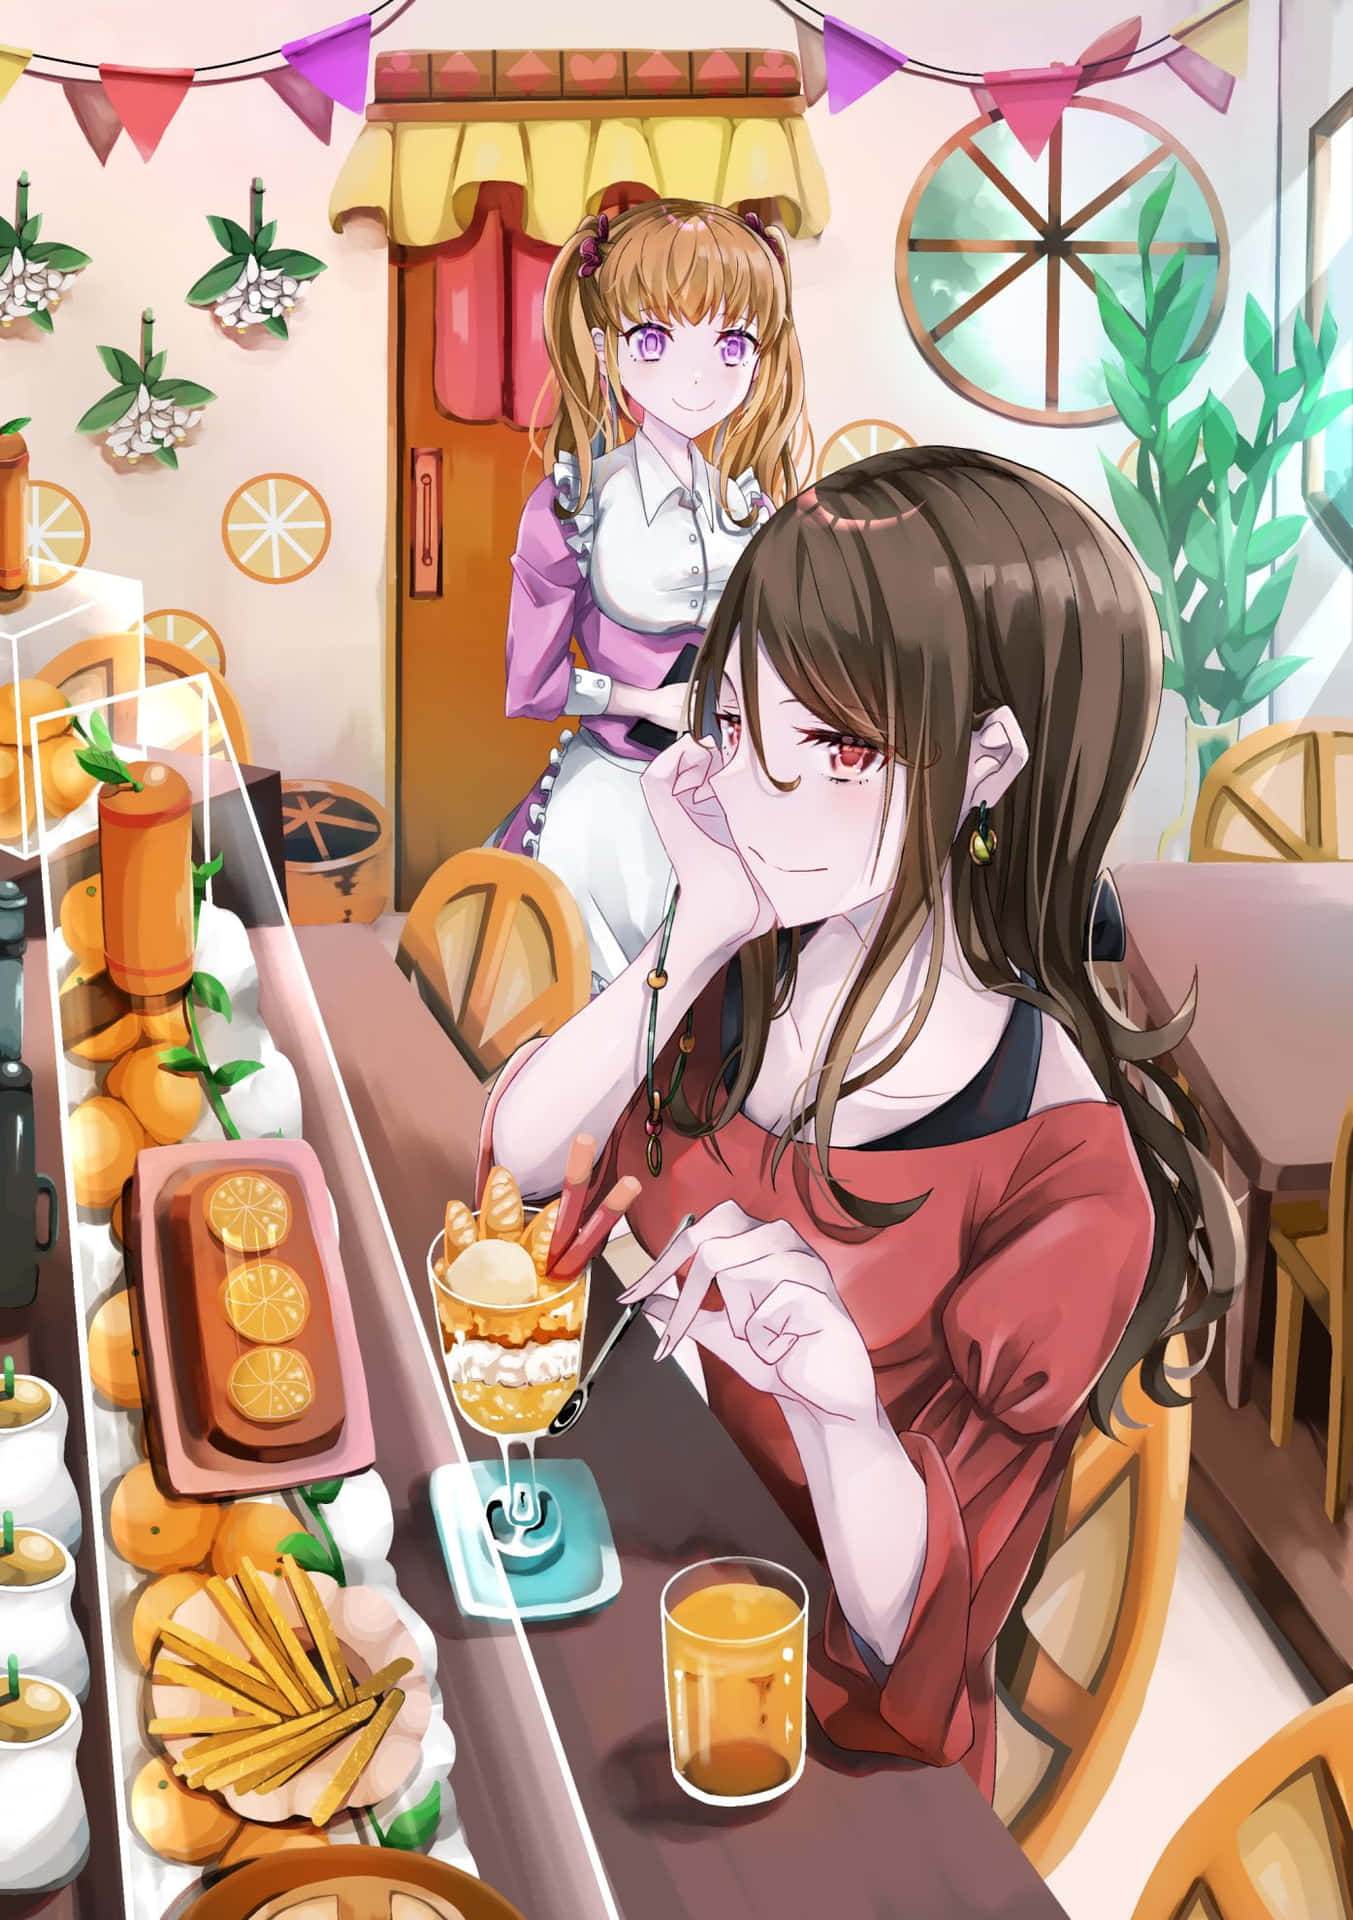 Relax and Unwind with a Hot Beverage at Cafe Anime Wallpaper